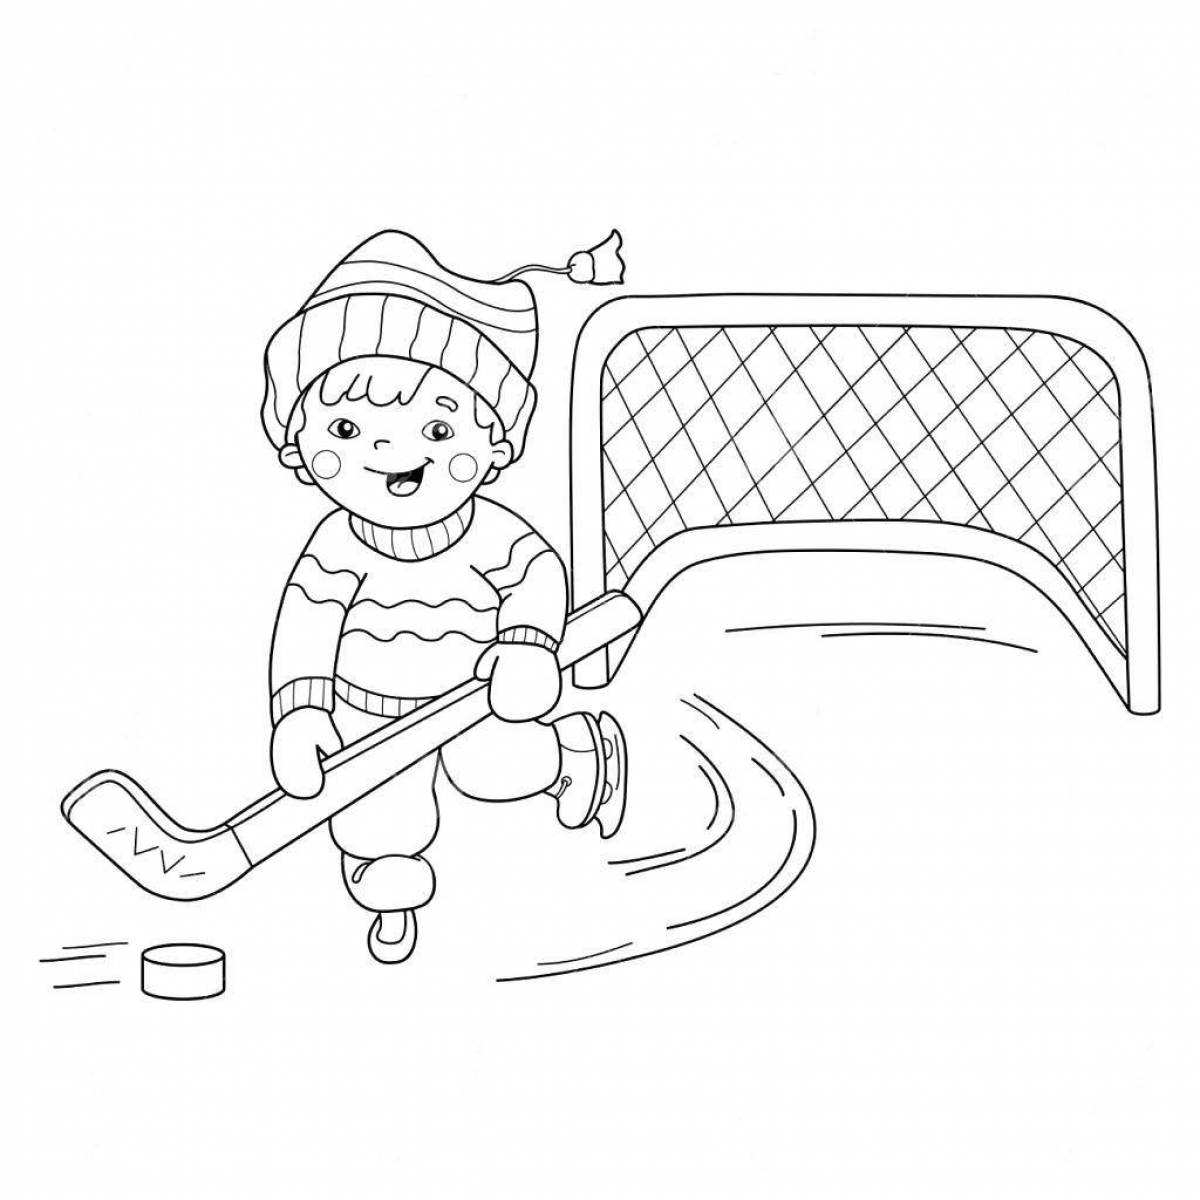 Glorious winter sports coloring page